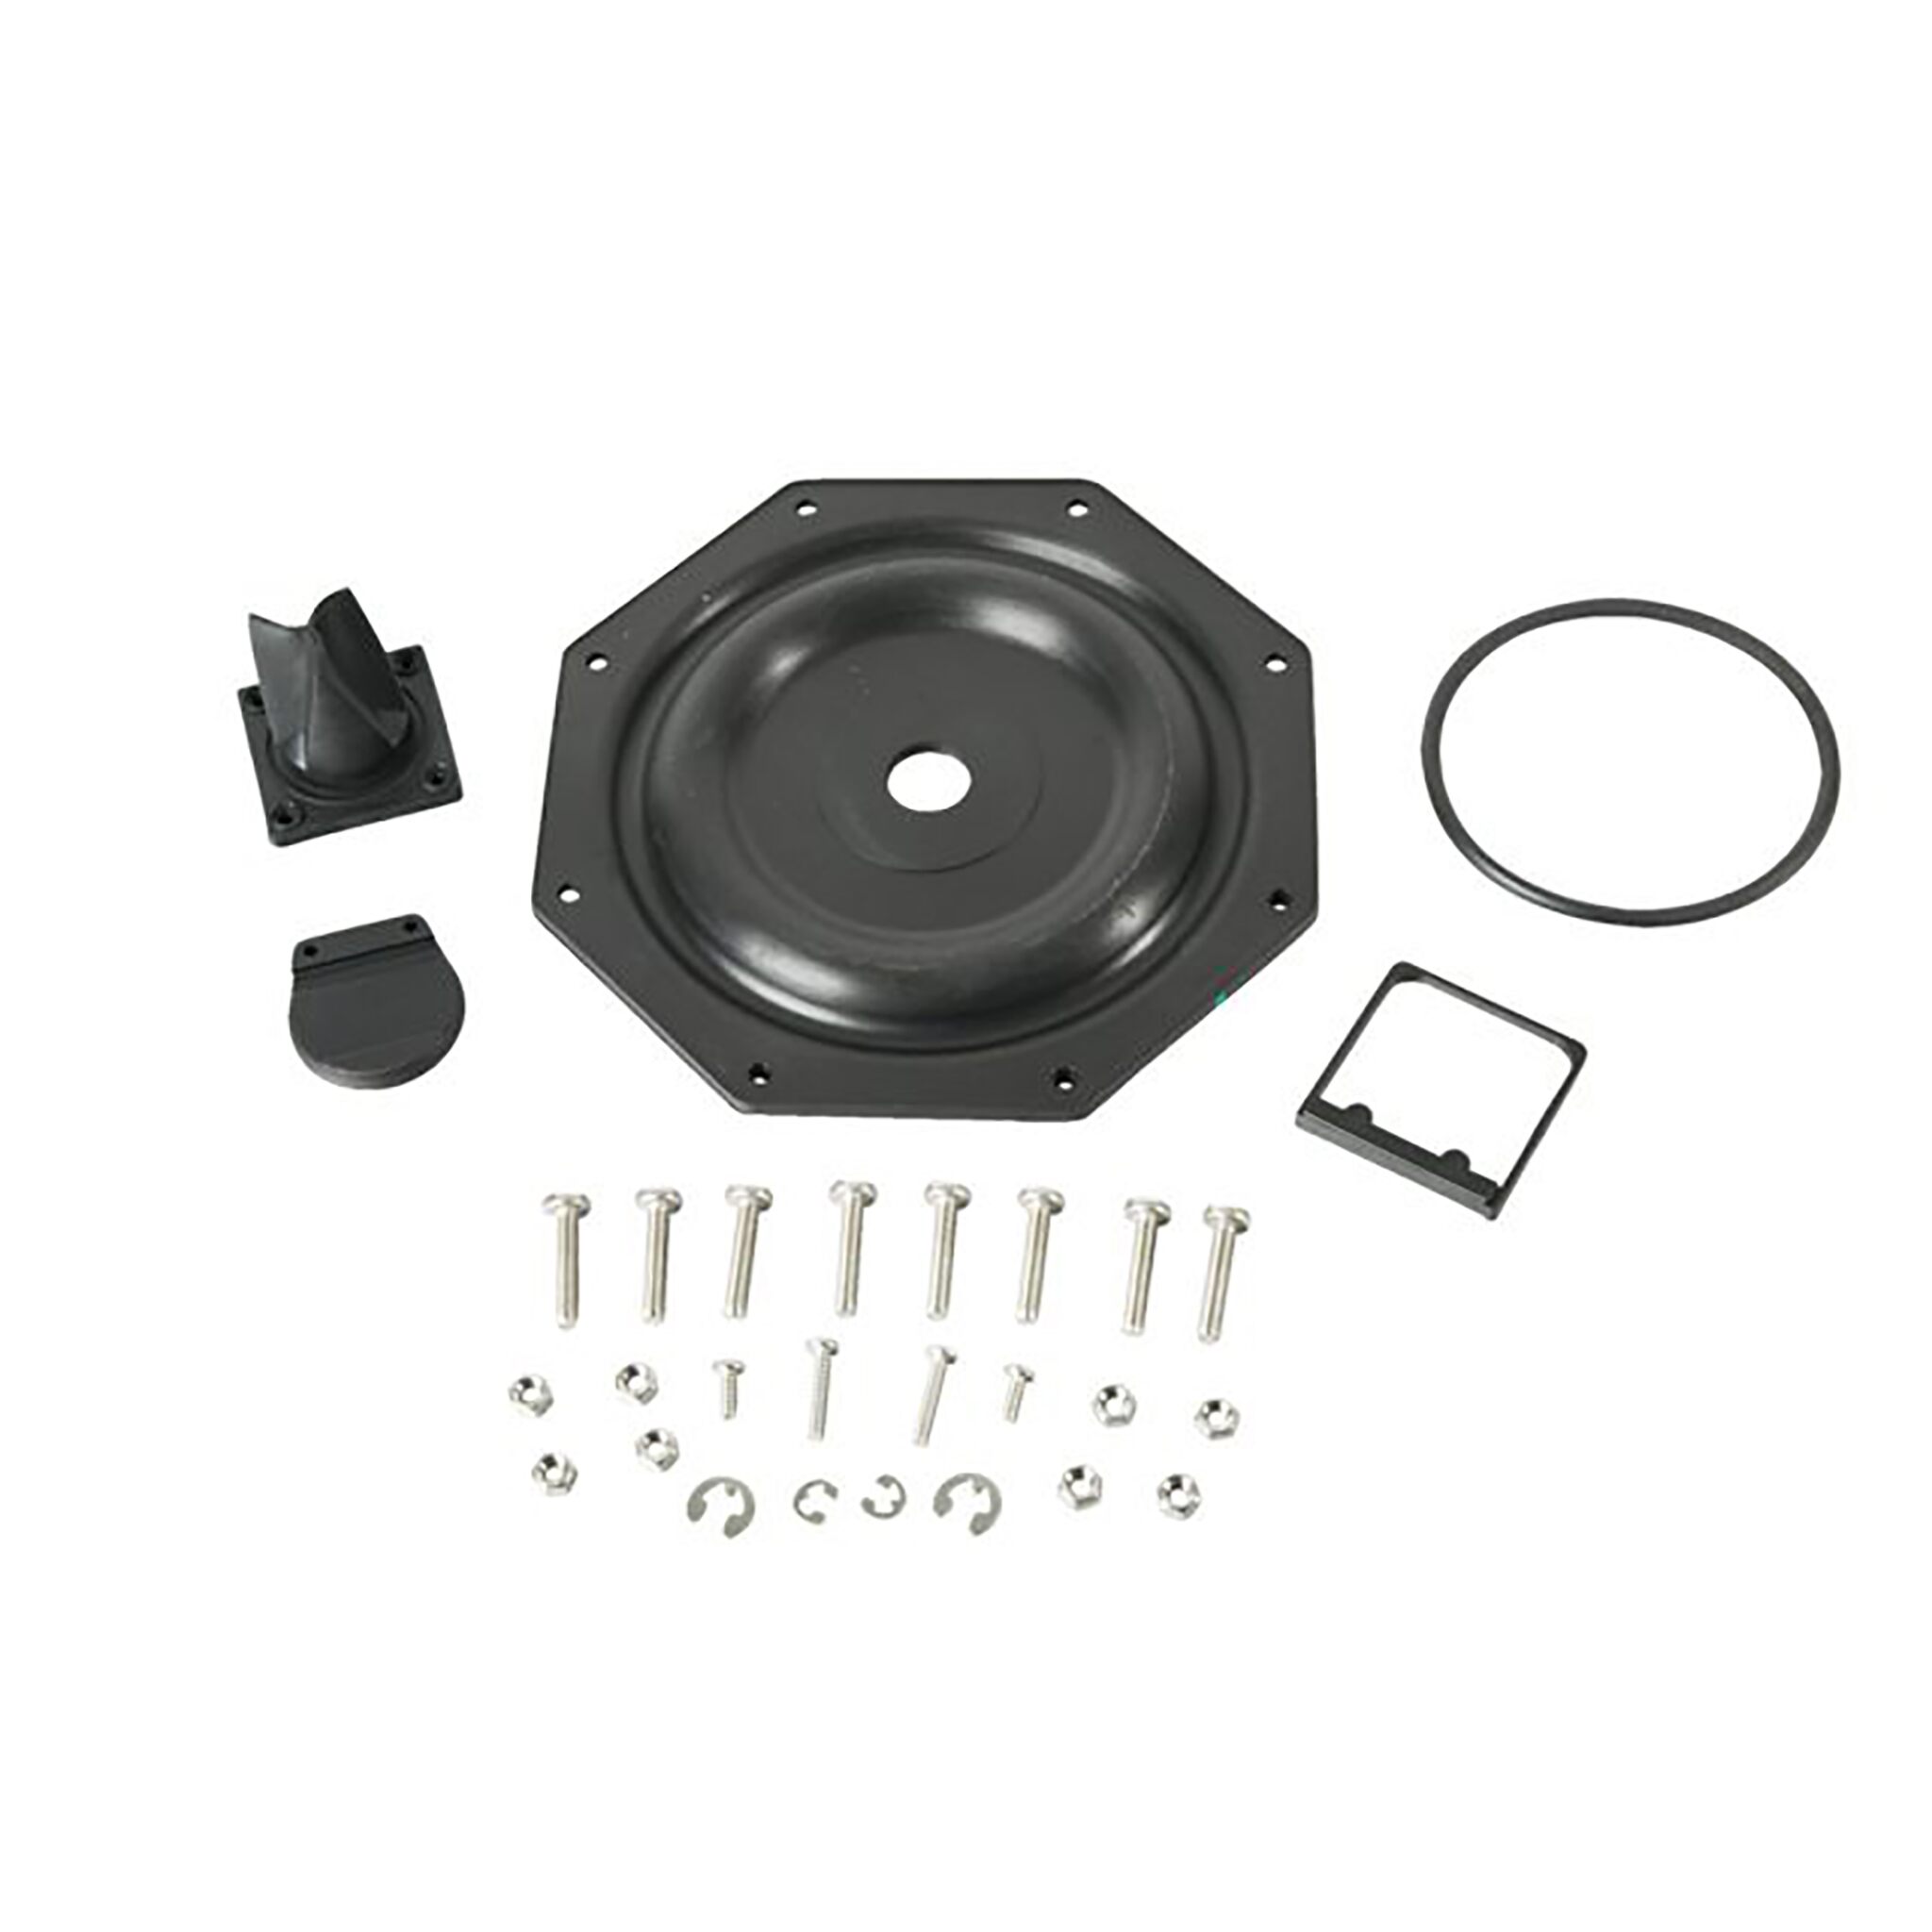 Spare parts kit for fecal pump